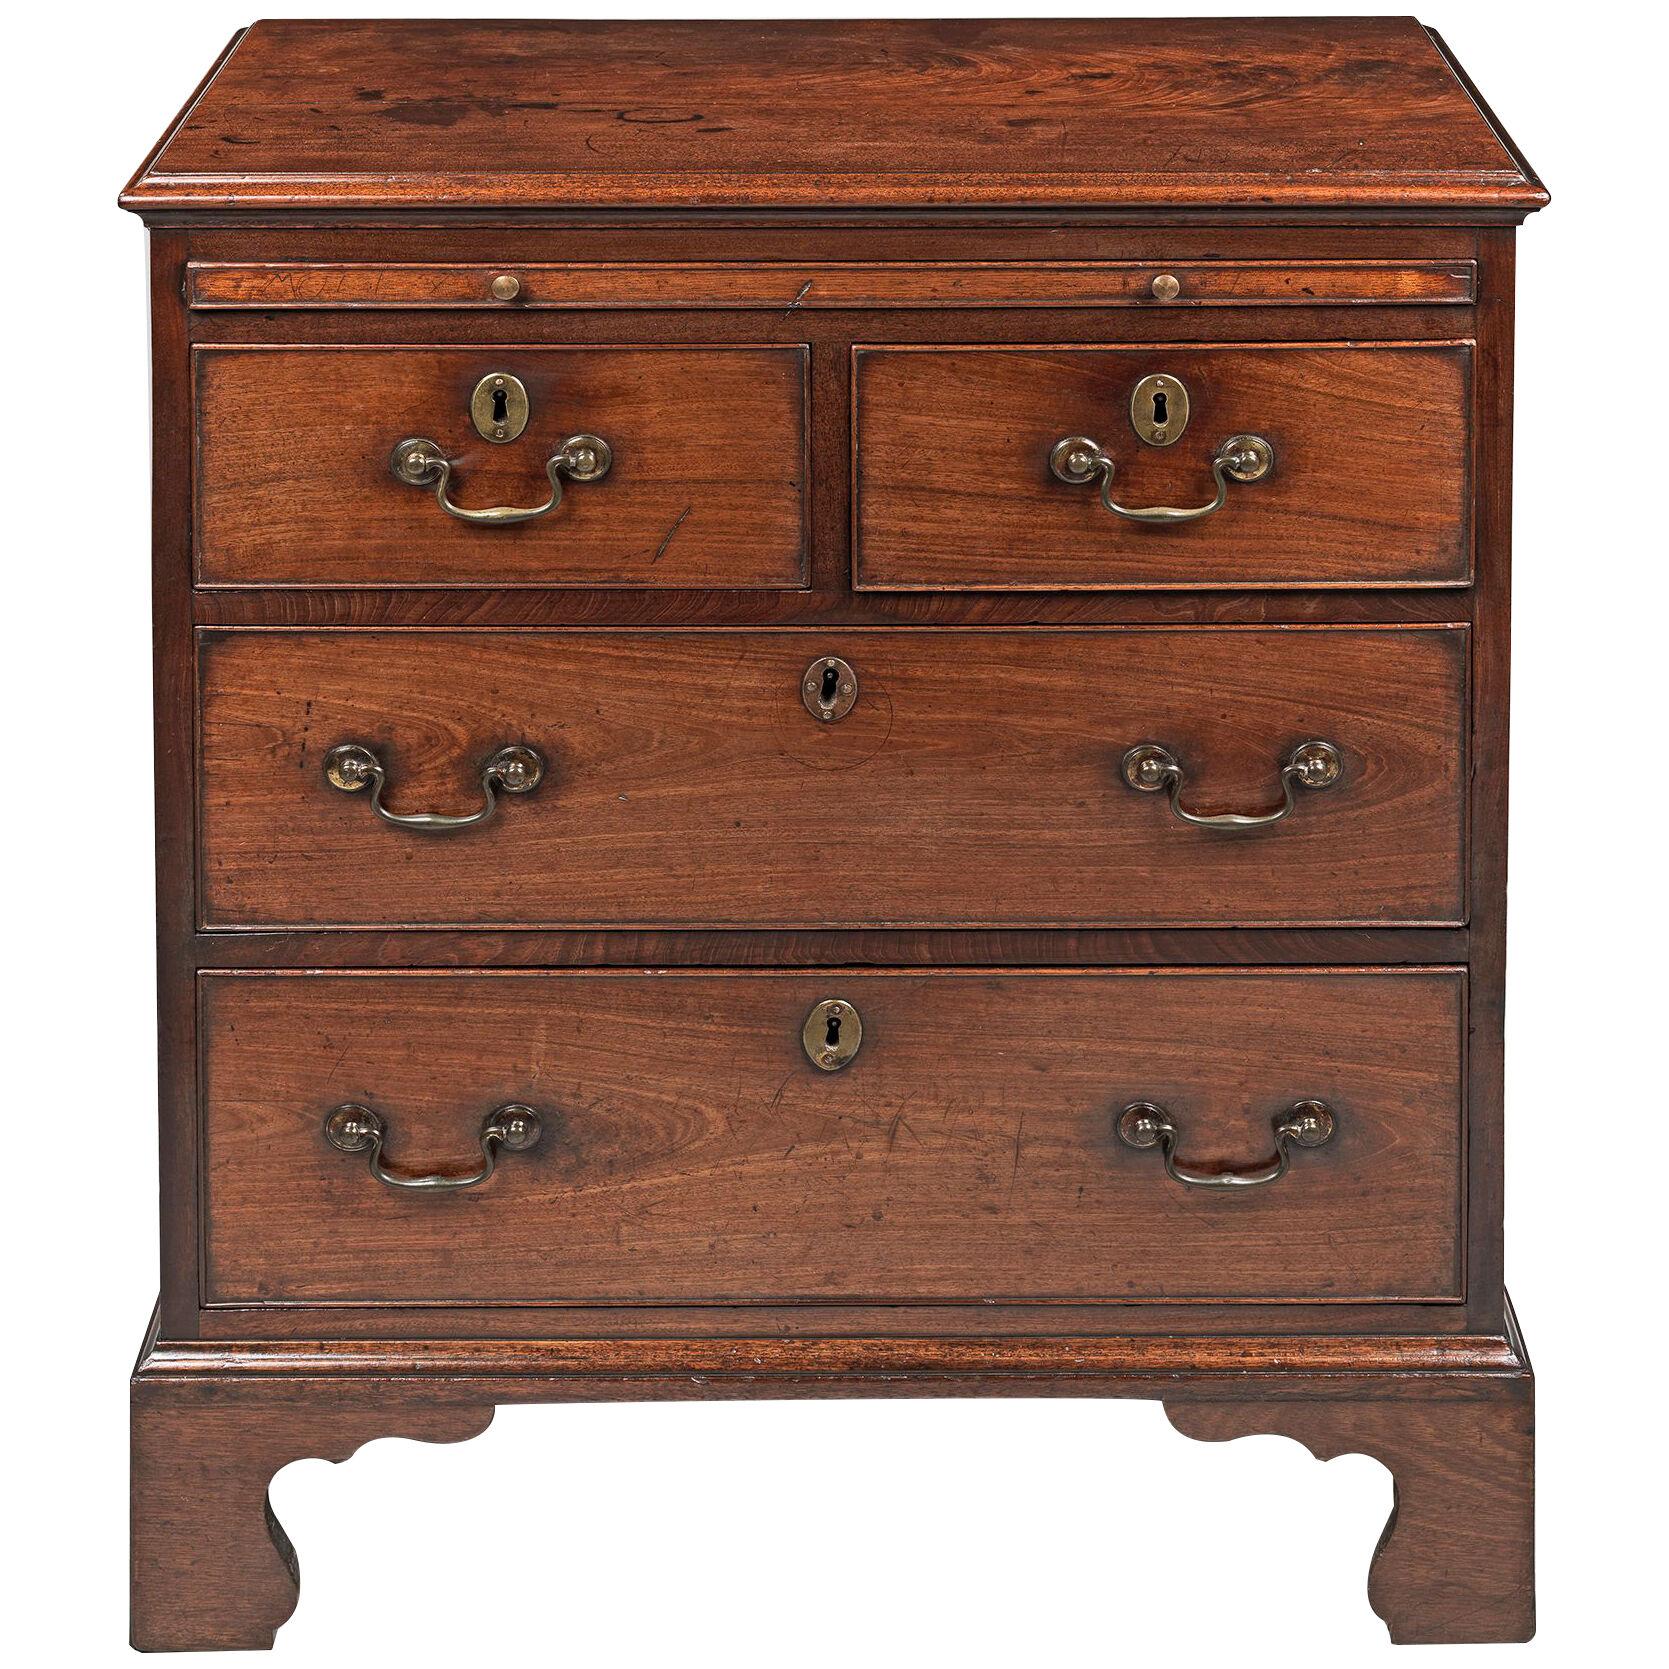 Small early Georgian mahogany chest of drawers